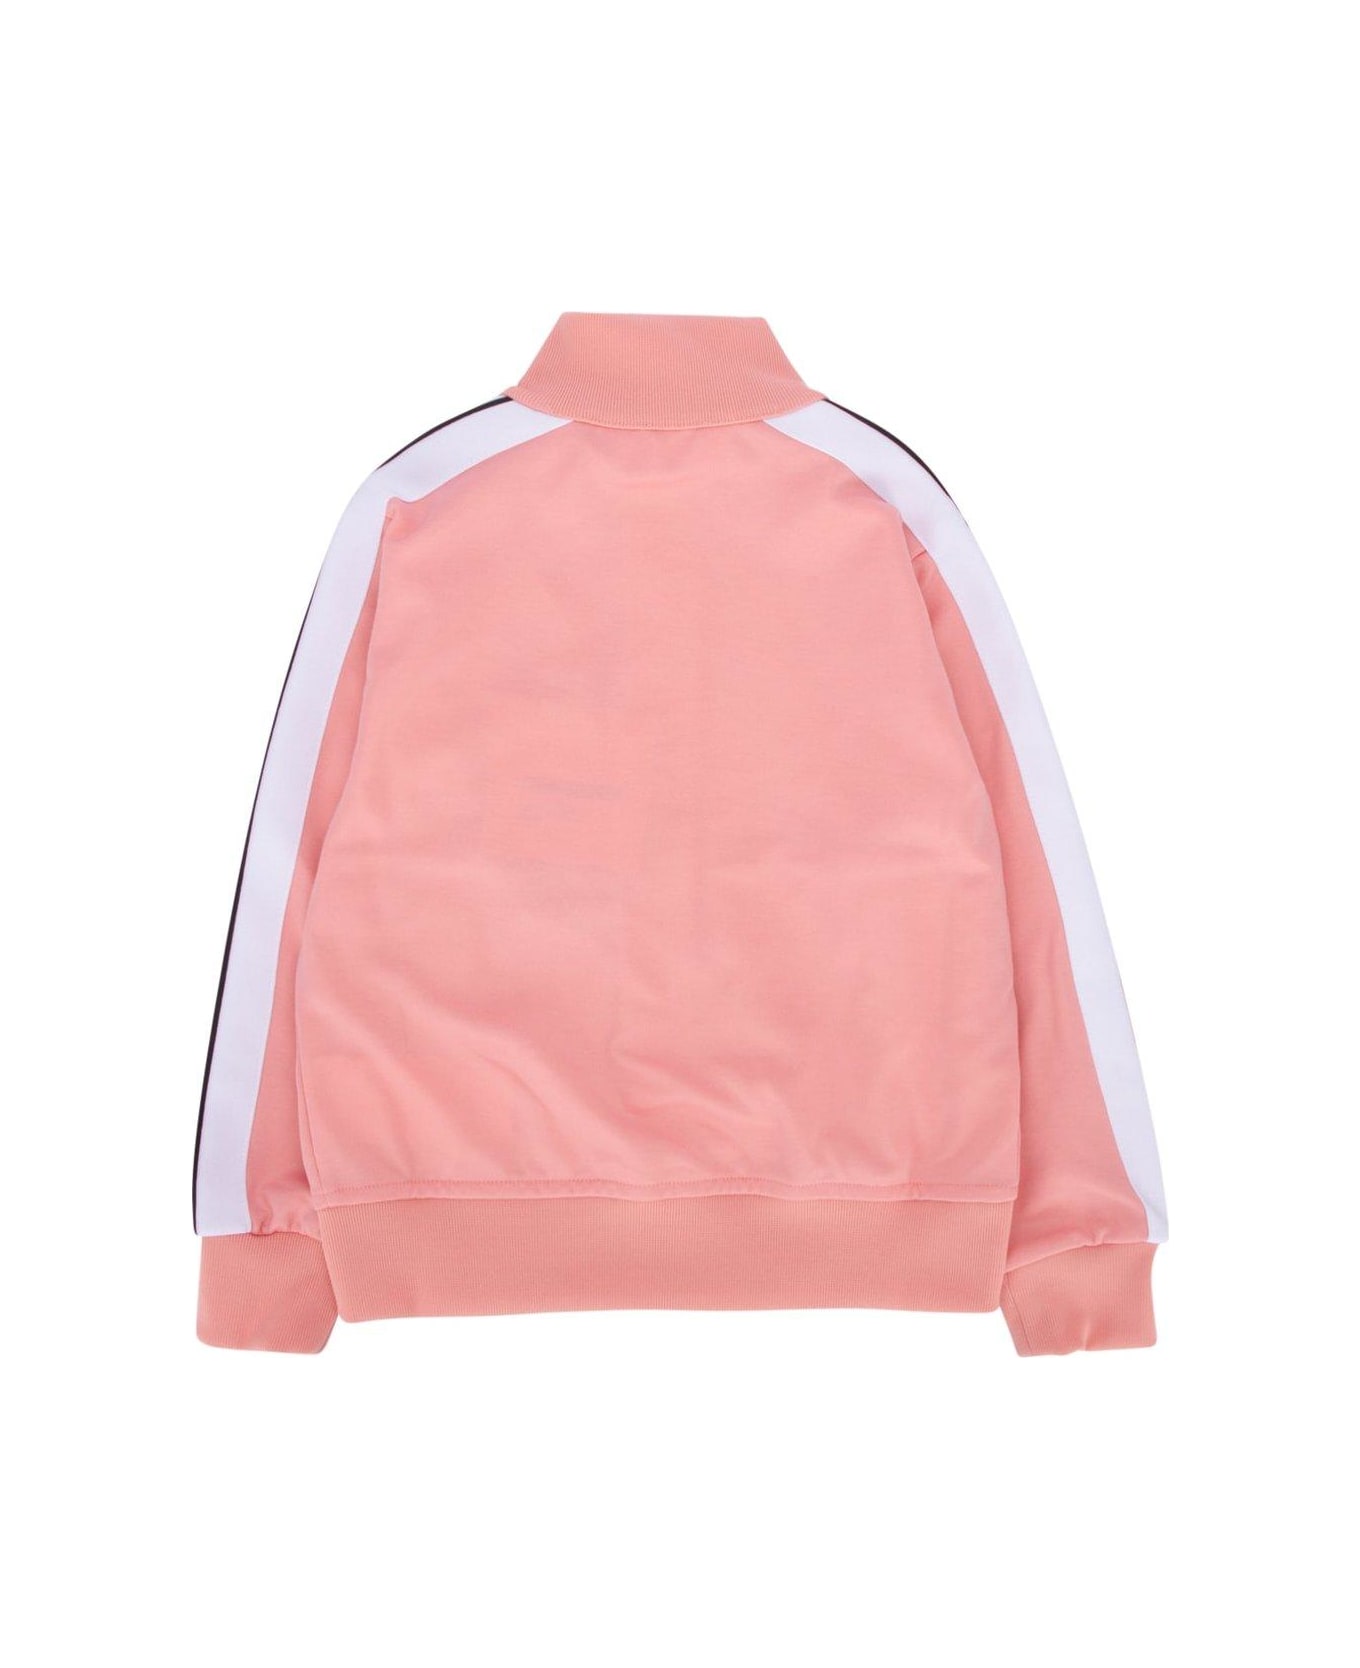 Palm Angels Zipped Side Striped Track Jacket - Pink White